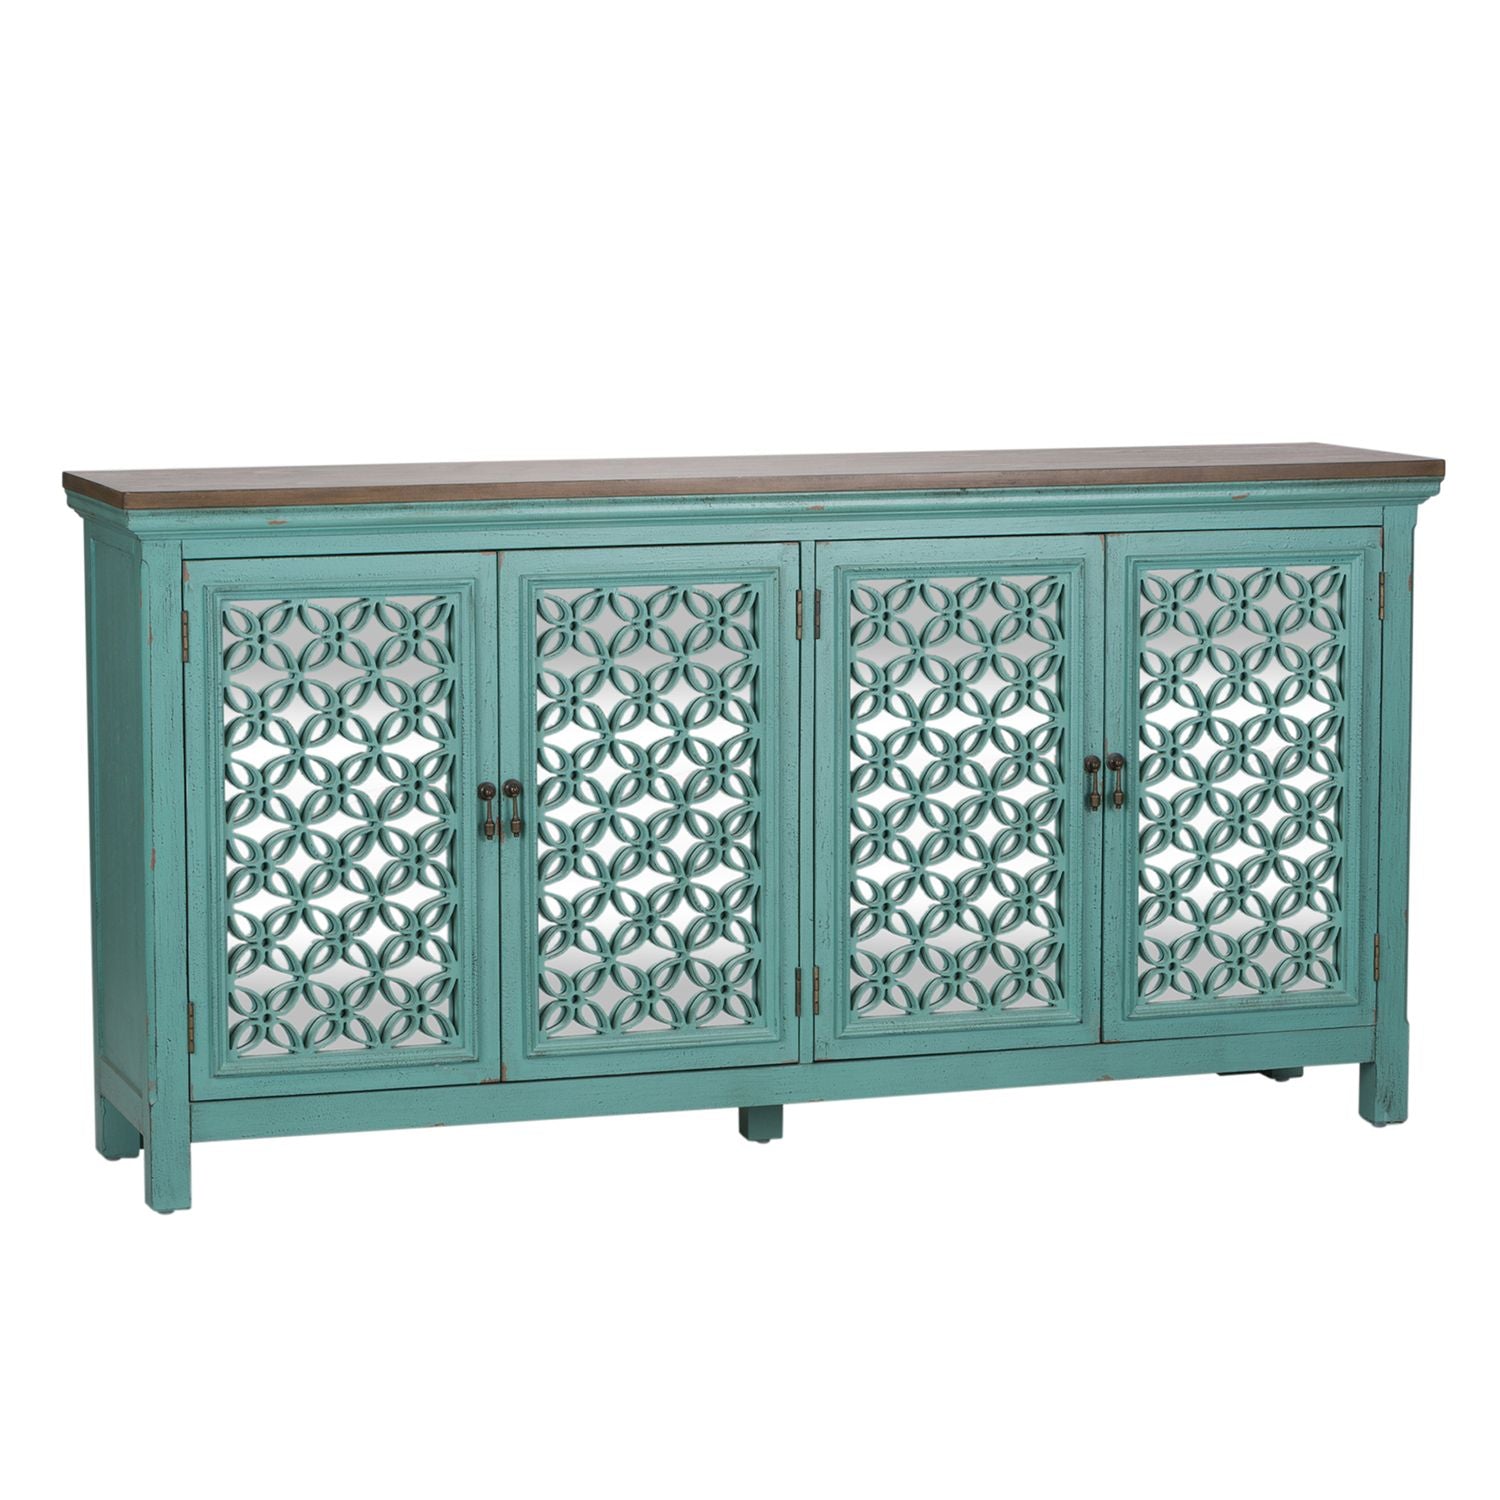 Dinell 4 Door Accent Cabinet